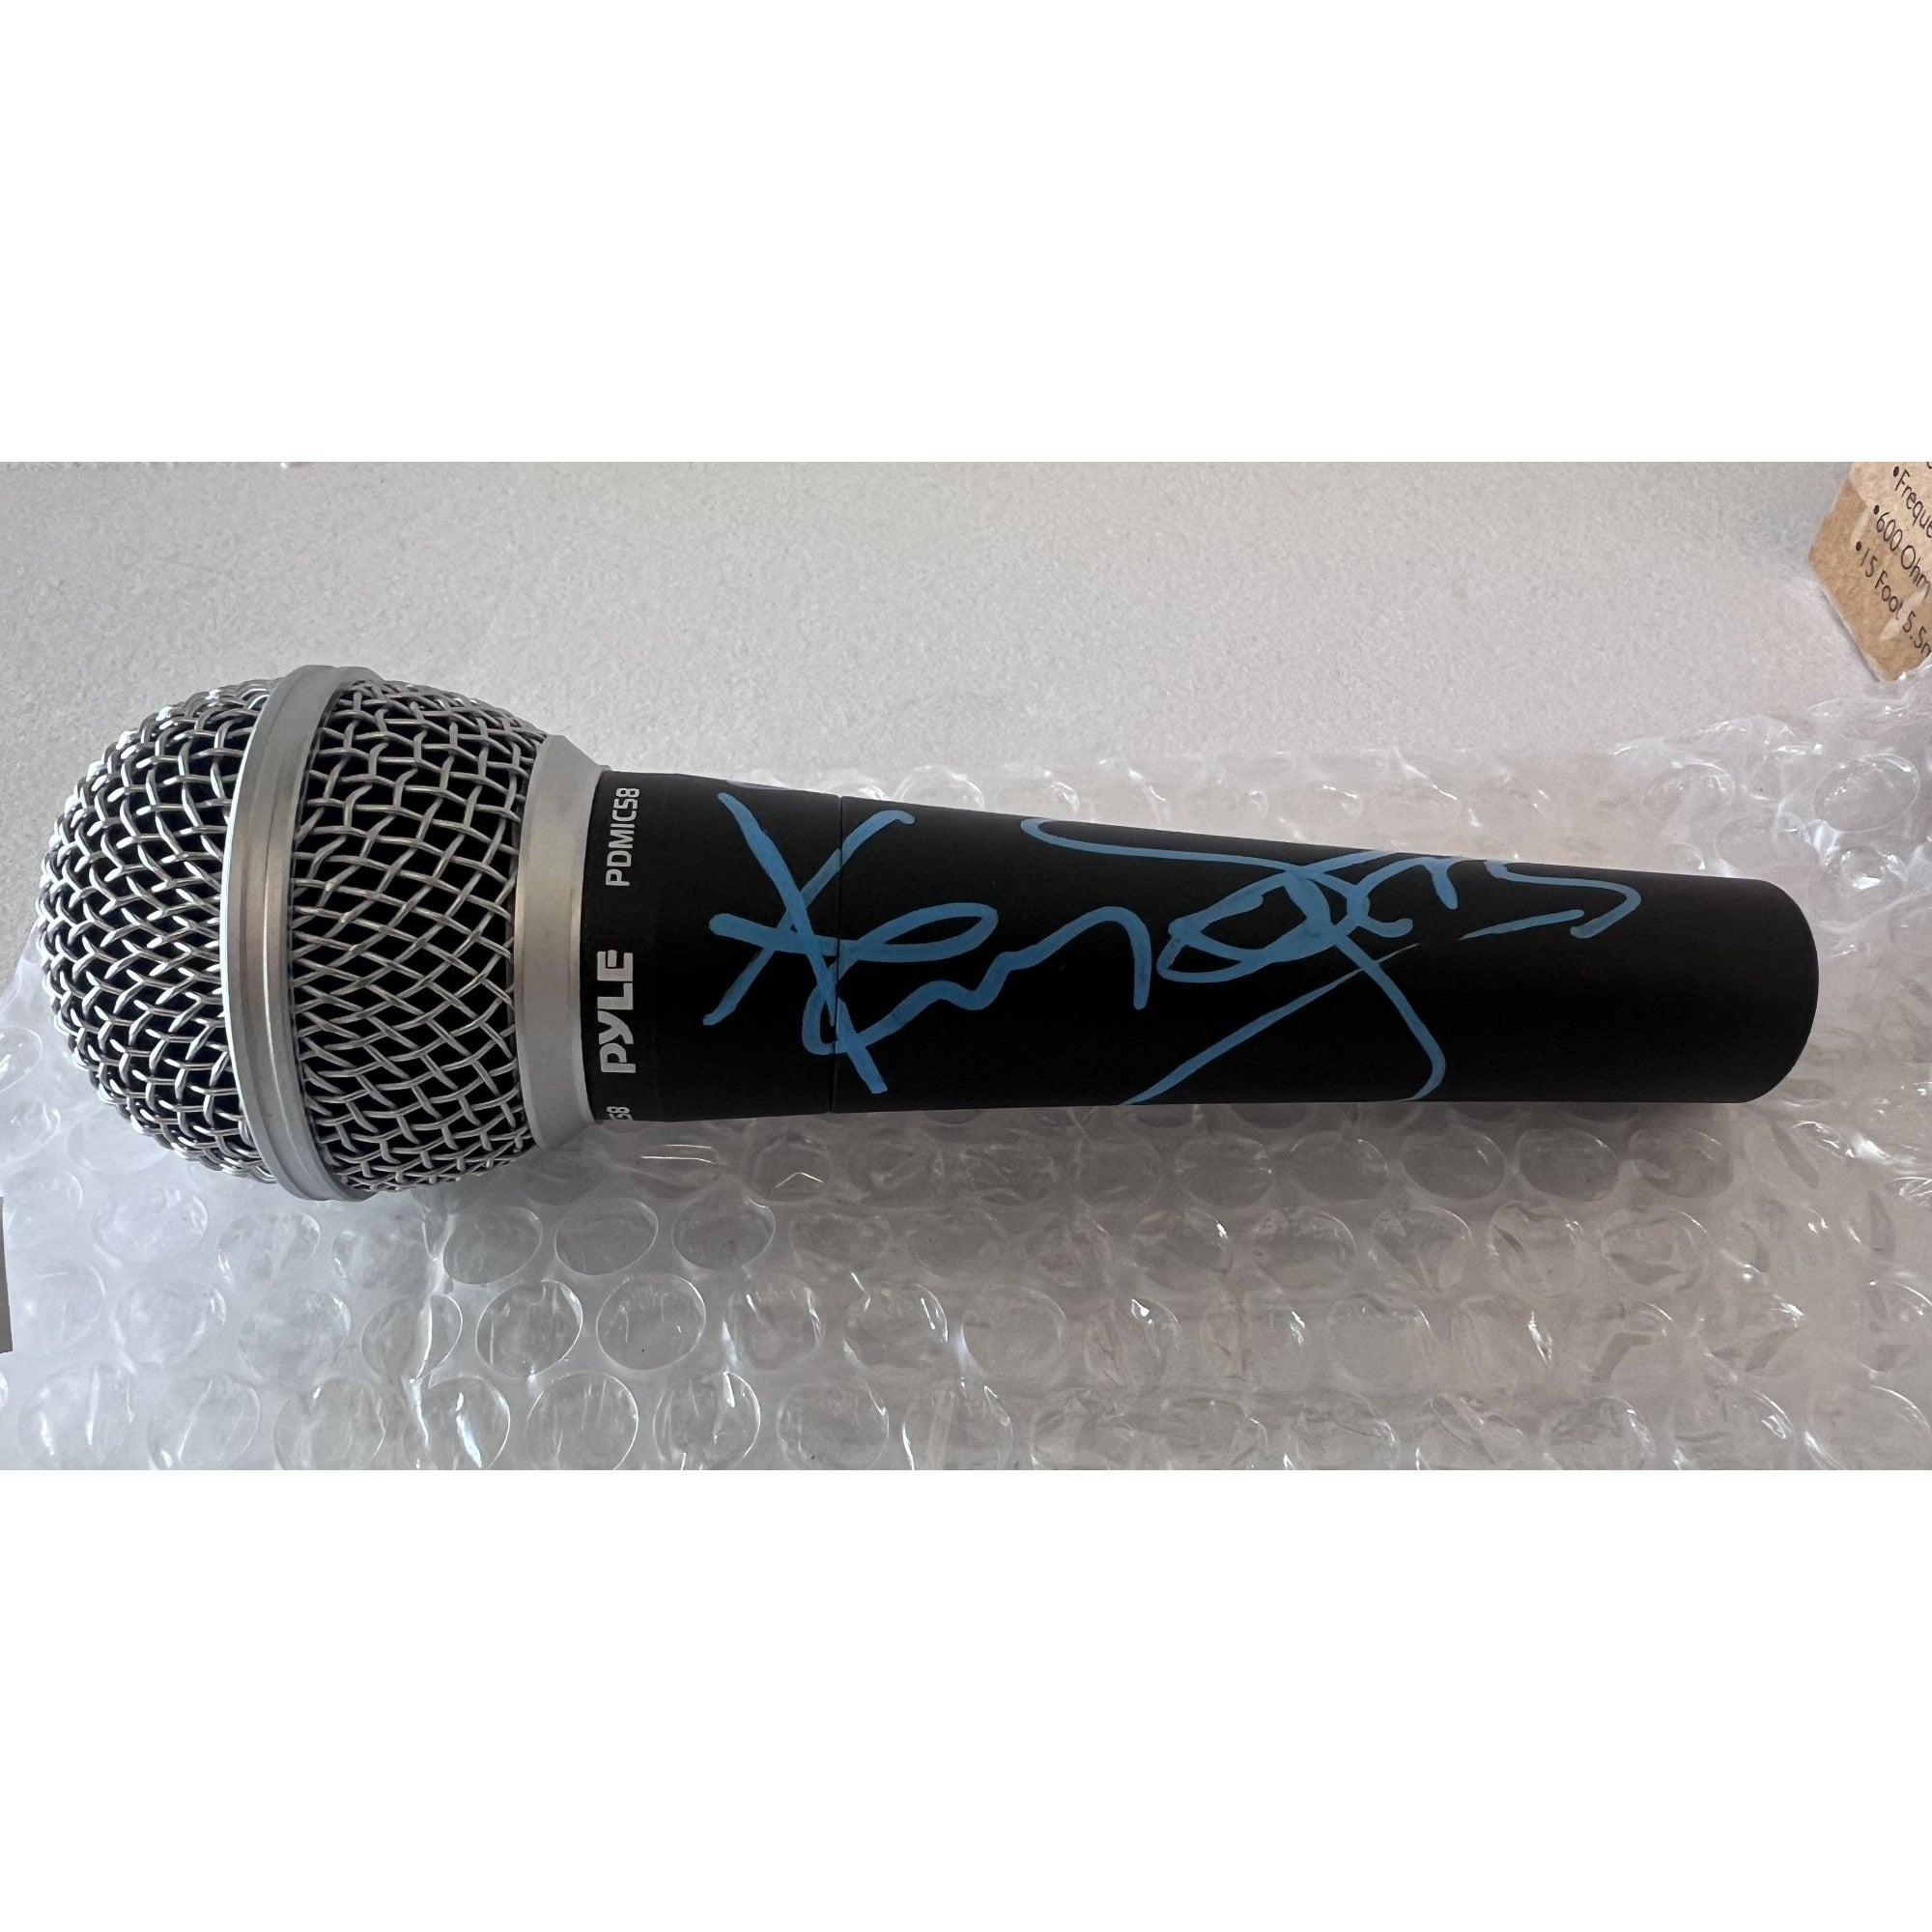 Dolly Parton and Kenny Rogers microphone signed with proof